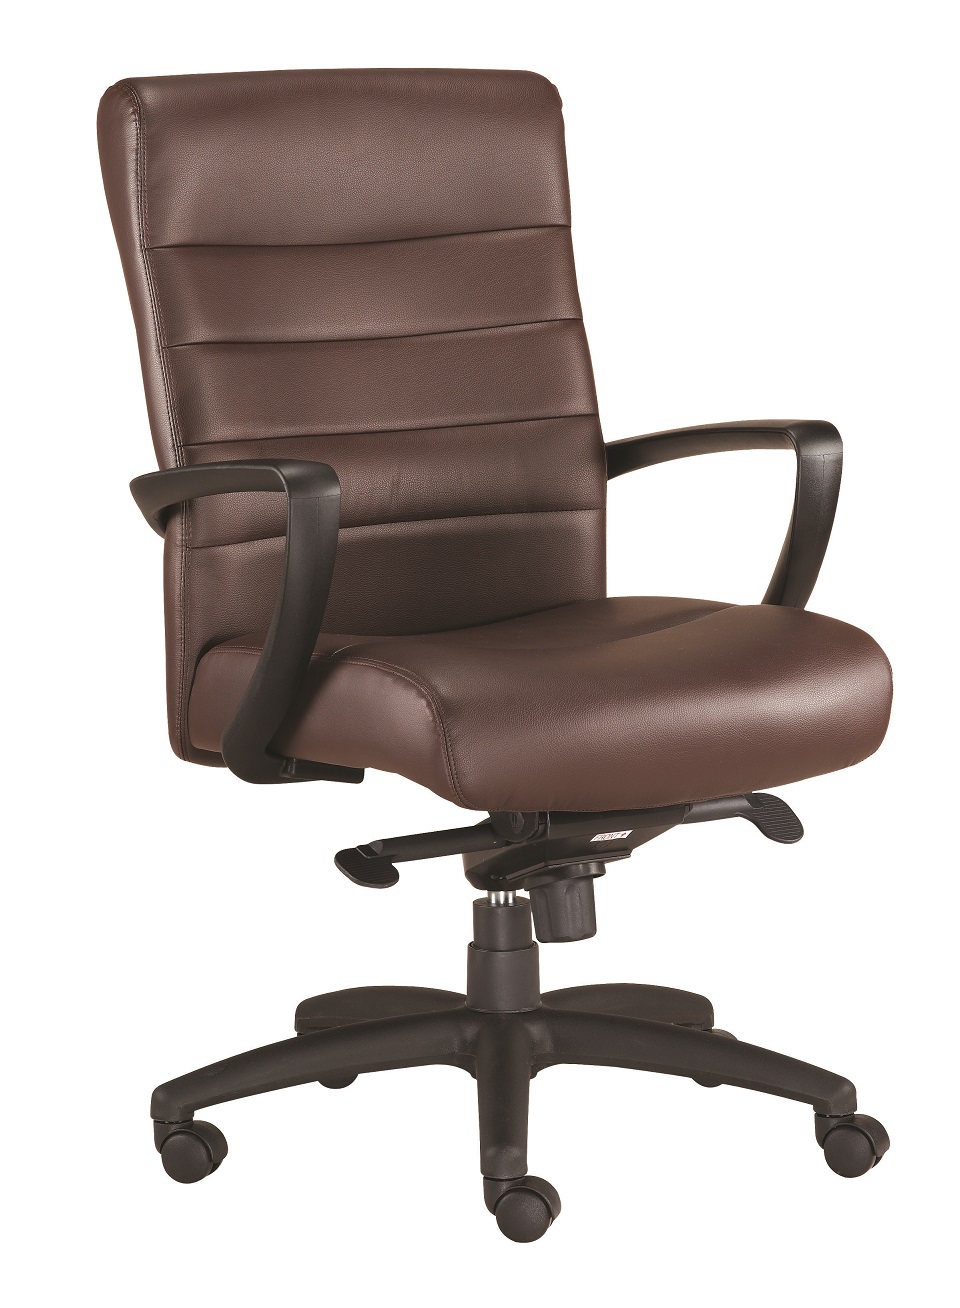 Brown and Black Adjustable Swivel Faux Leather Rolling Office Chair-372379-1